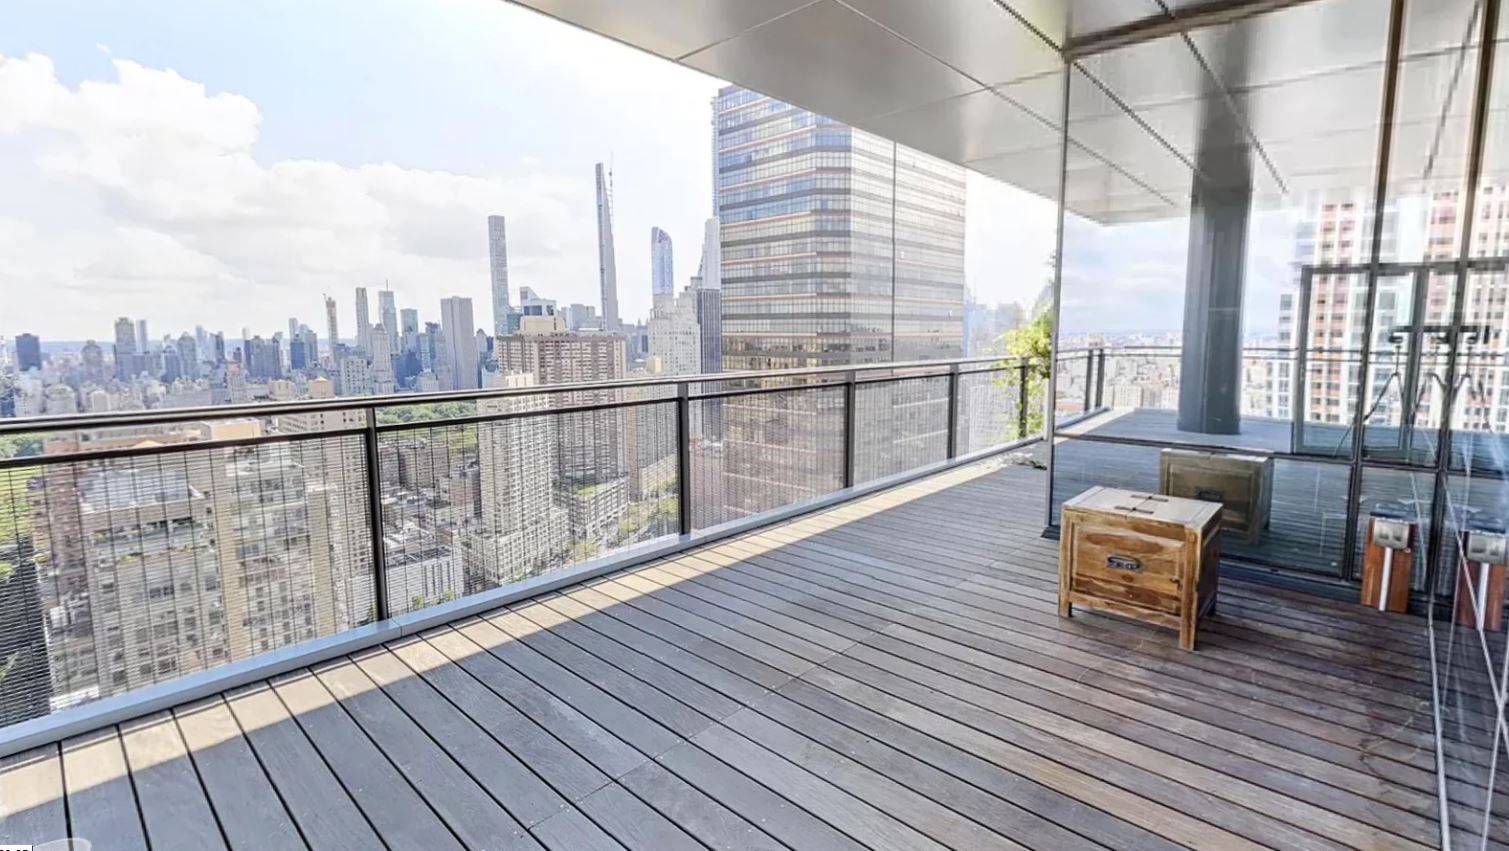 Upper West Side, 3 Bed 3 Bath, WIC, Terrace, Dining Area, Floor to Ceiling Windows, Washer and Dryer, River Views